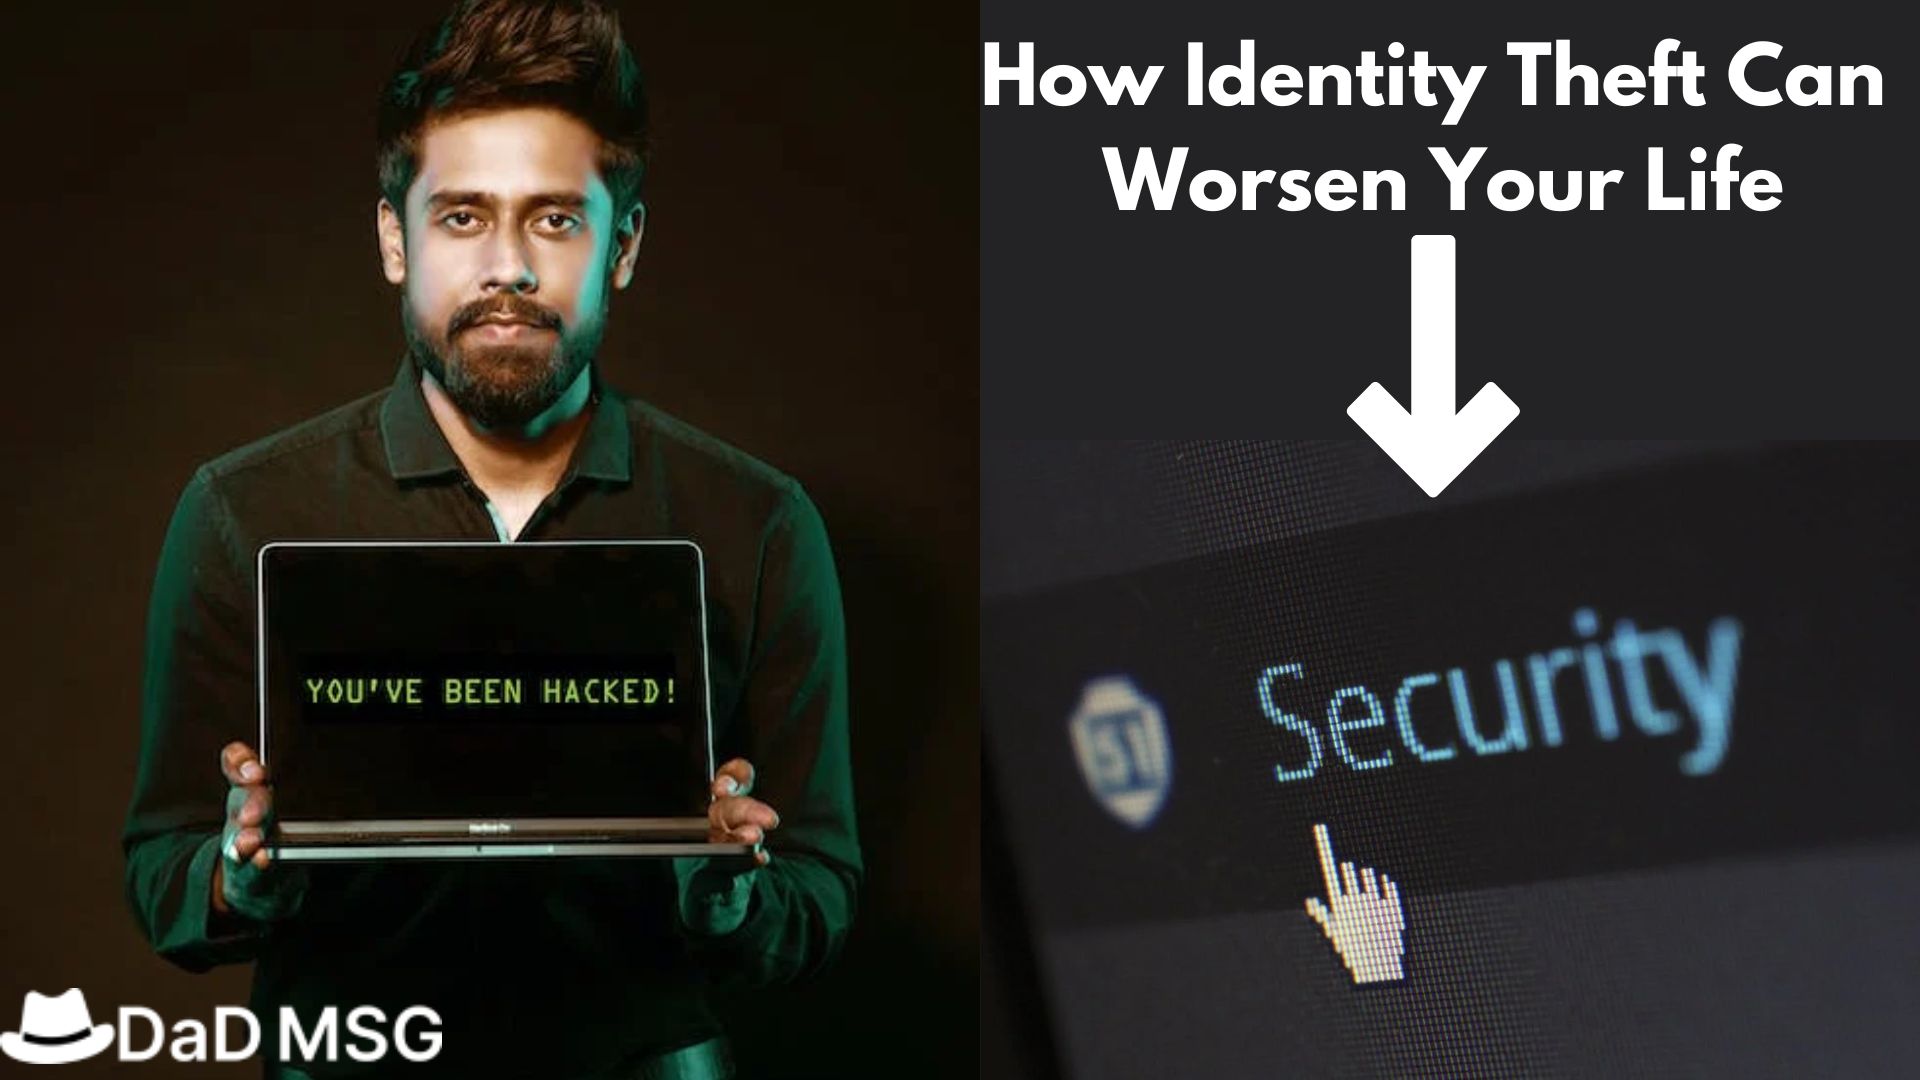 How Identity Theft Can Worsen Your Life?